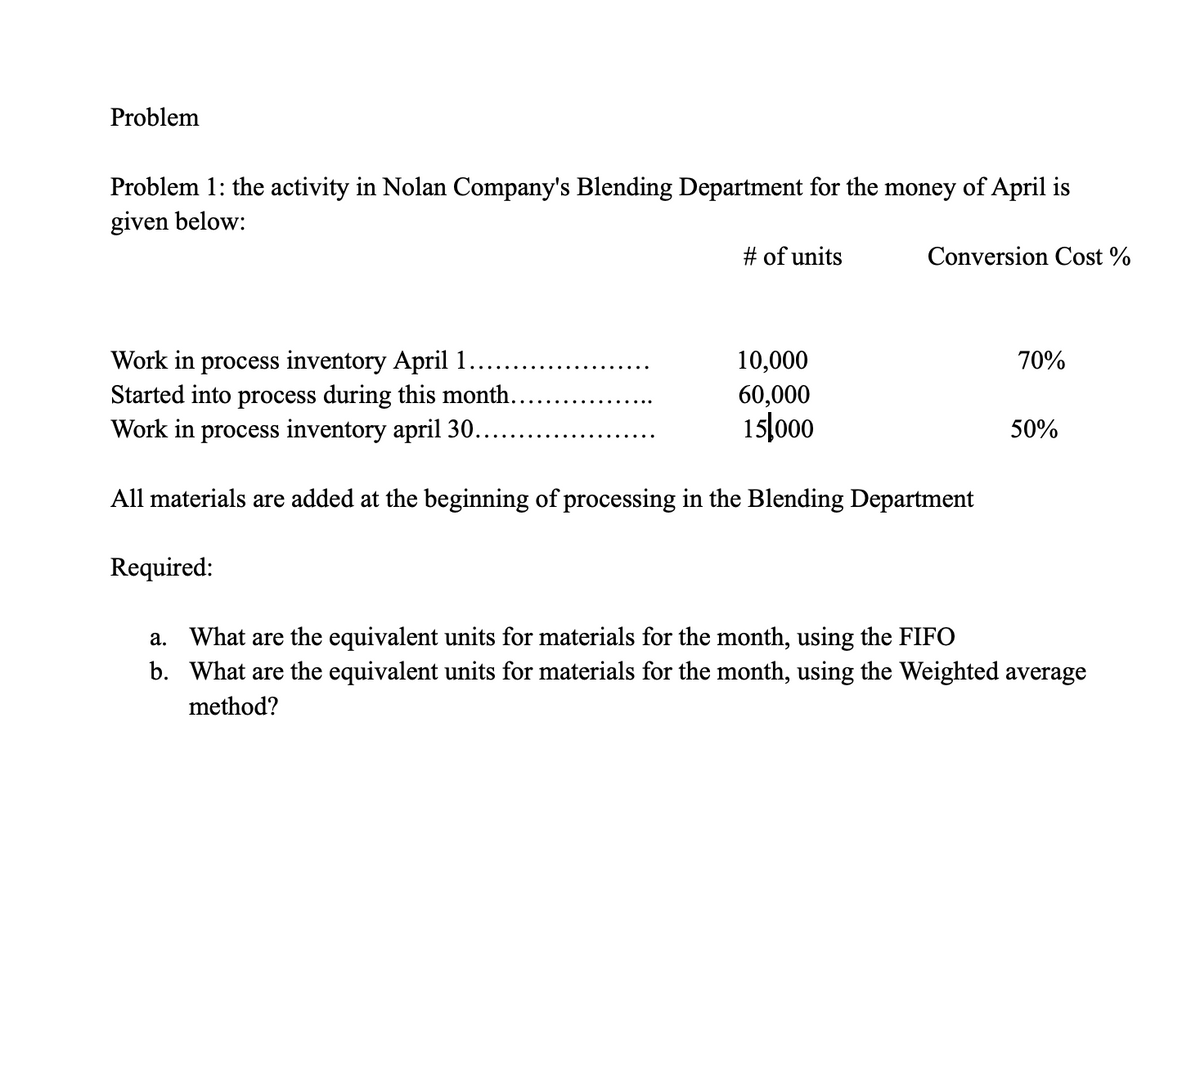 Problem
Problem 1: the activity in Nolan Company's Blending Department for the money of April is
given below:
Work in process inventory April 1.
Started into process during this month..
Work in process inventory april 30...
# of units
Required:
10,000
60,000
15/000
Conversion Cost %
All materials are added at the beginning of processing in the Blending Department
70%
50%
a. What are the equivalent units for materials for the month, using the FIFO
b. What are the equivalent units for materials for the month, using the Weighted average
method?